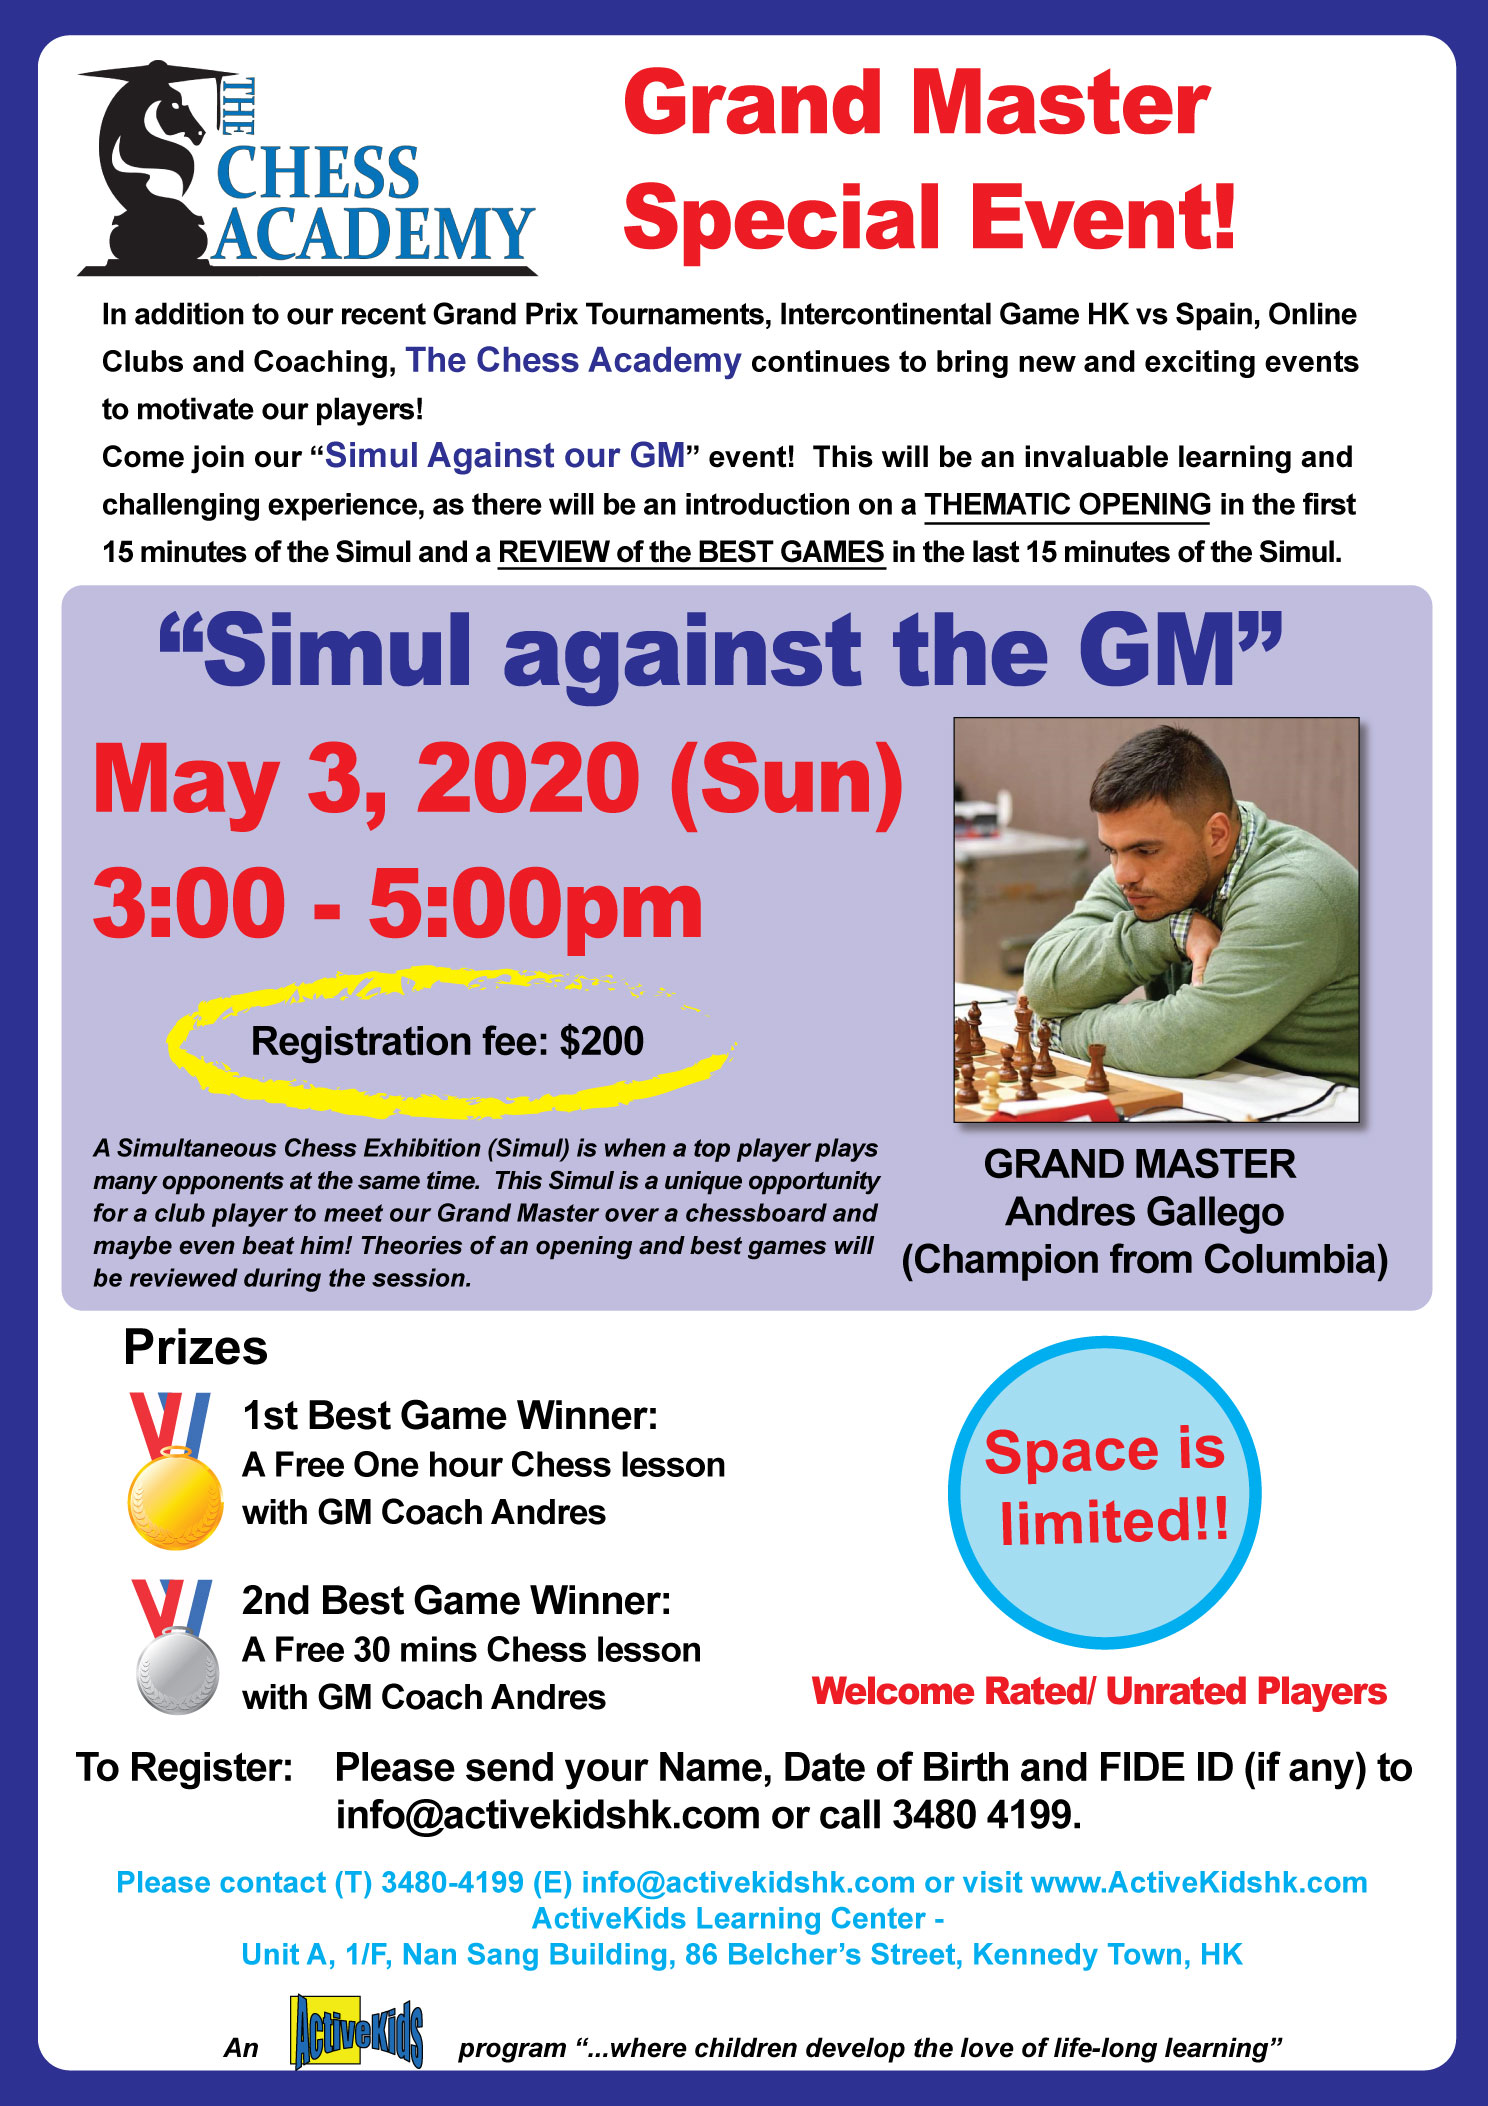 The Chess Academy – Grand Master Special Event!